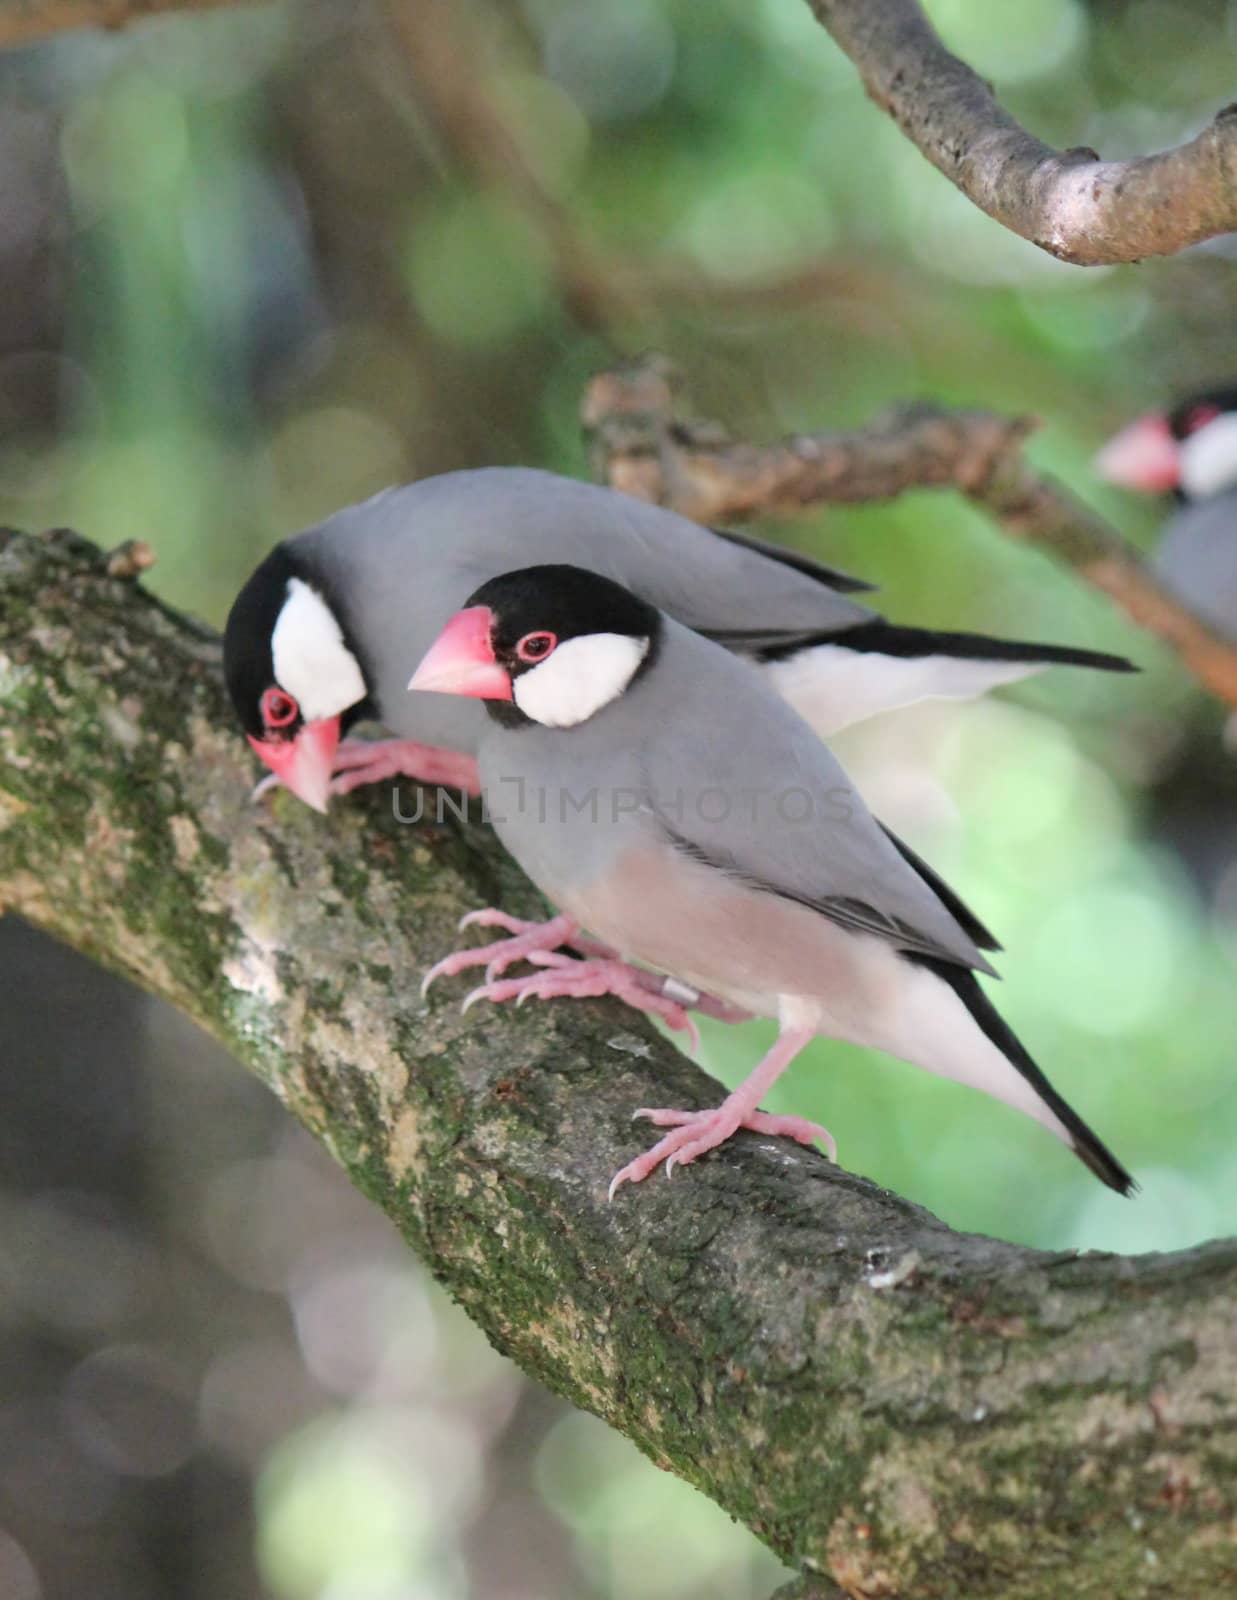 Two java padda colored birds on the branch of a tree